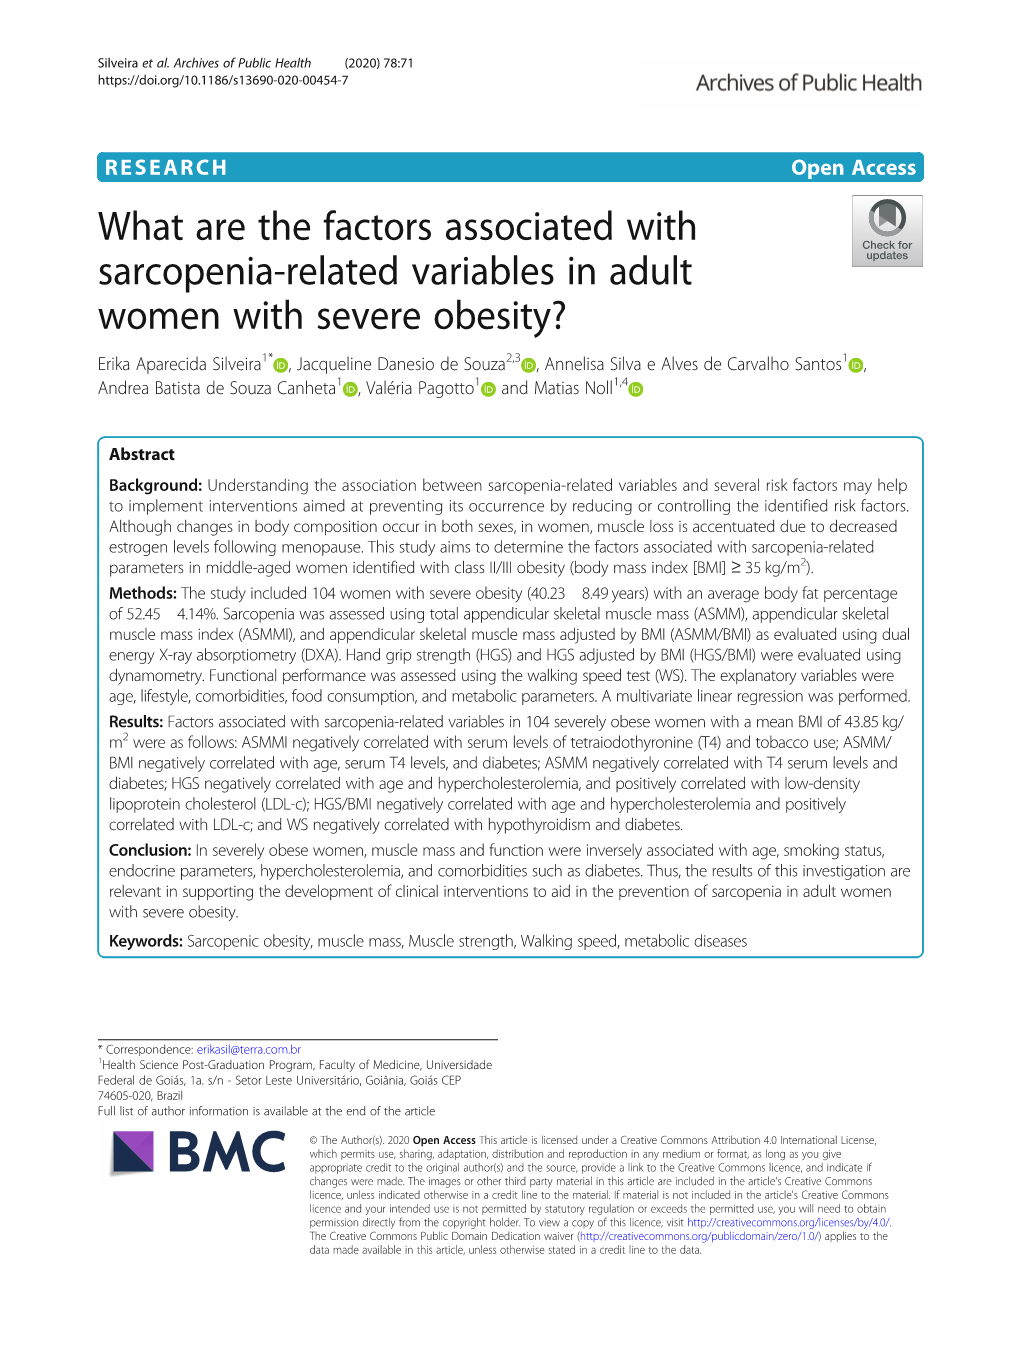 What Are the Factors Associated with Sarcopenia-Related Variables In